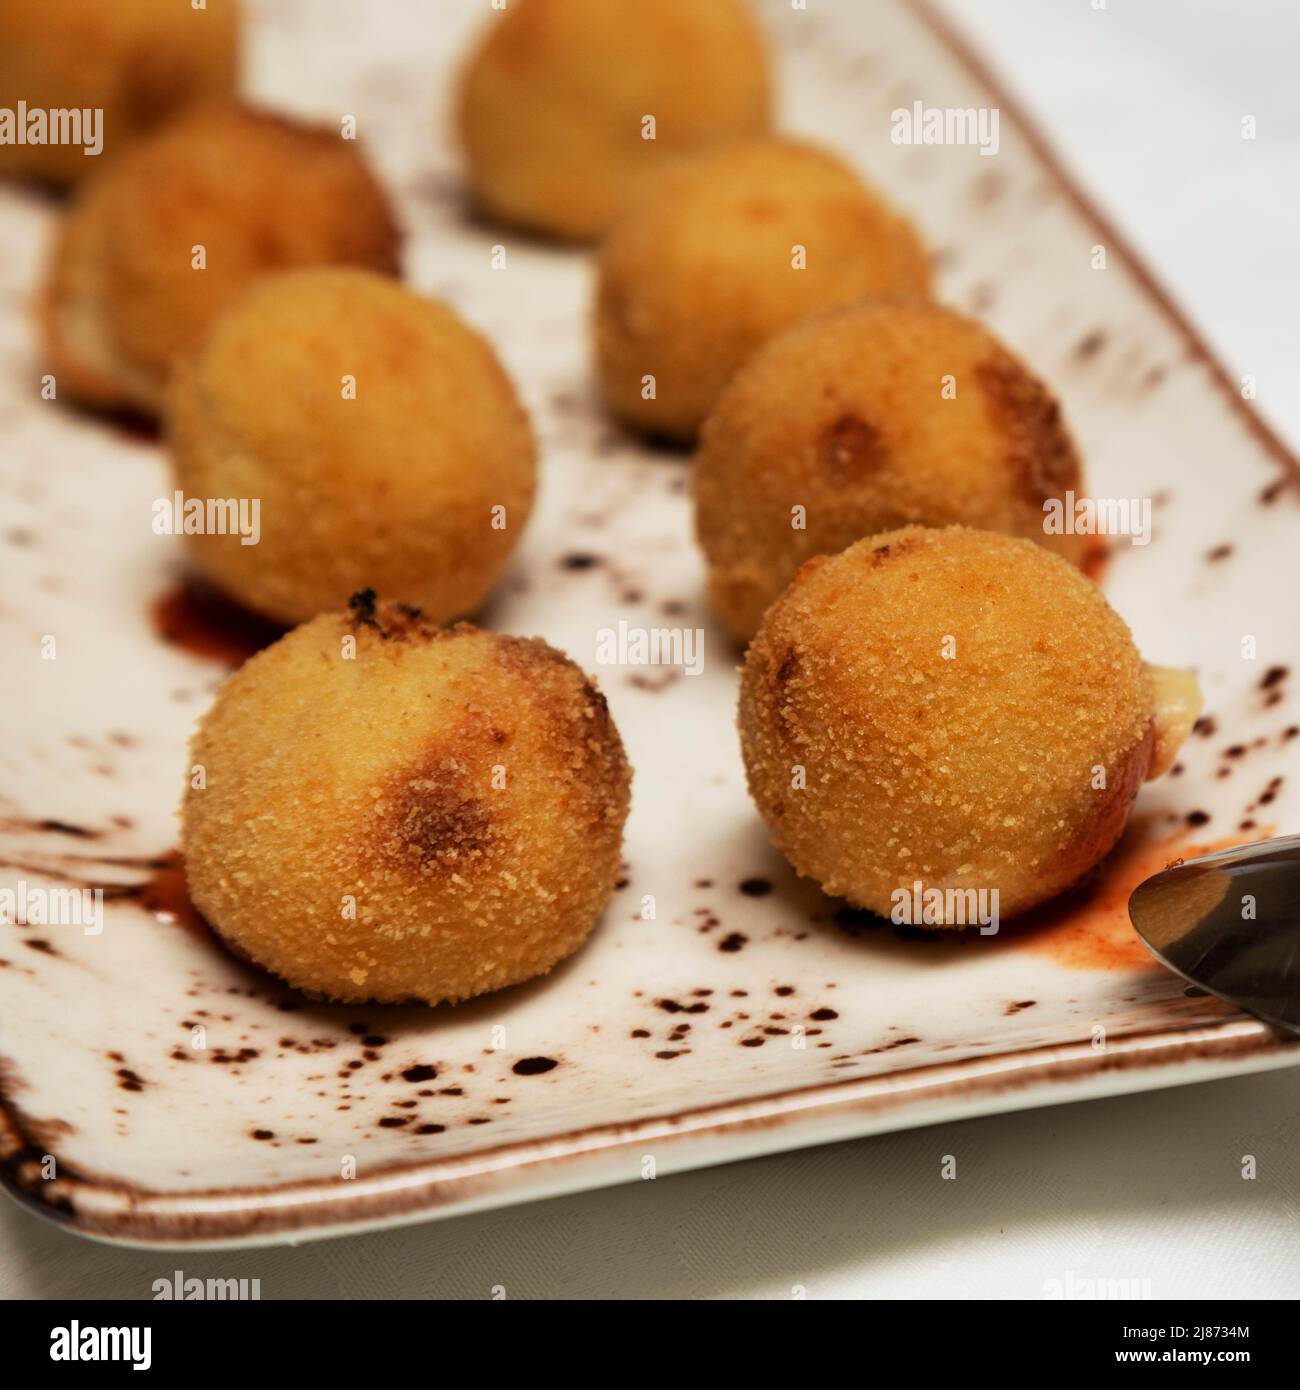 Croquettes (croquetas) filled with cheese served as an appetizer in Tenerife. The deep-fried balls are also a popular tapas. Stock Photo